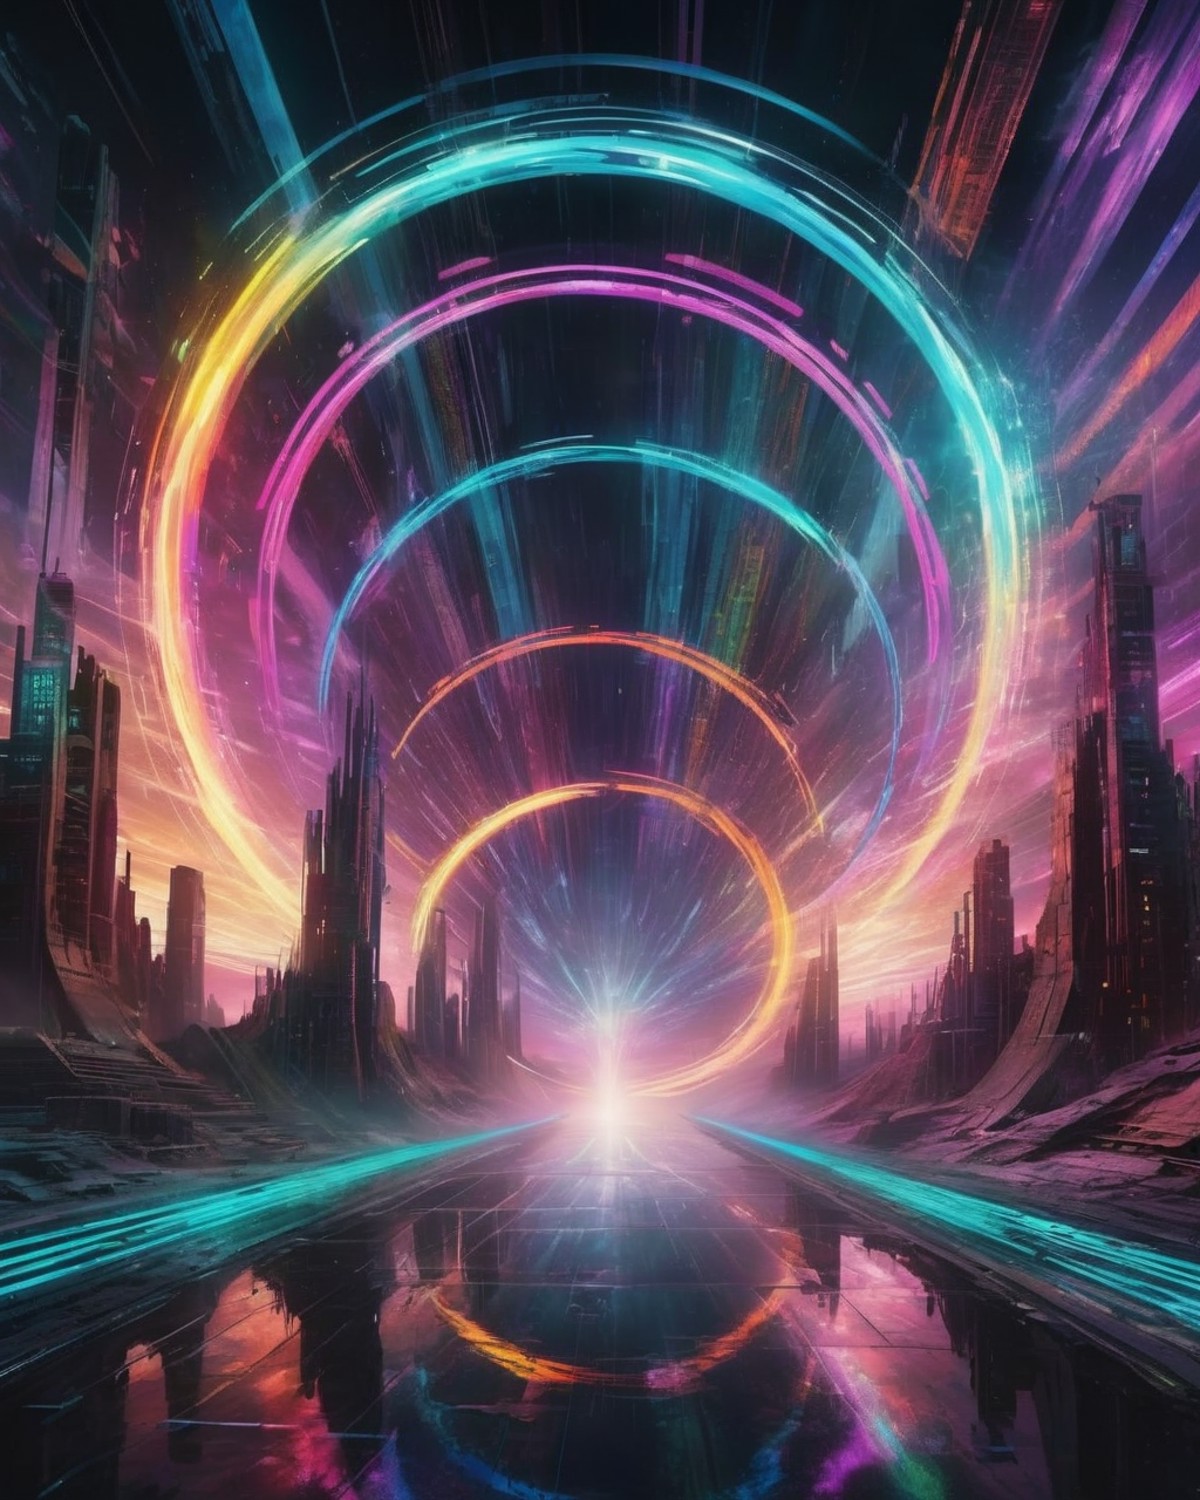 Vortex portal, swirling rifts in reality connecting different dimensions, casting multicolored beams across the dystopian ...